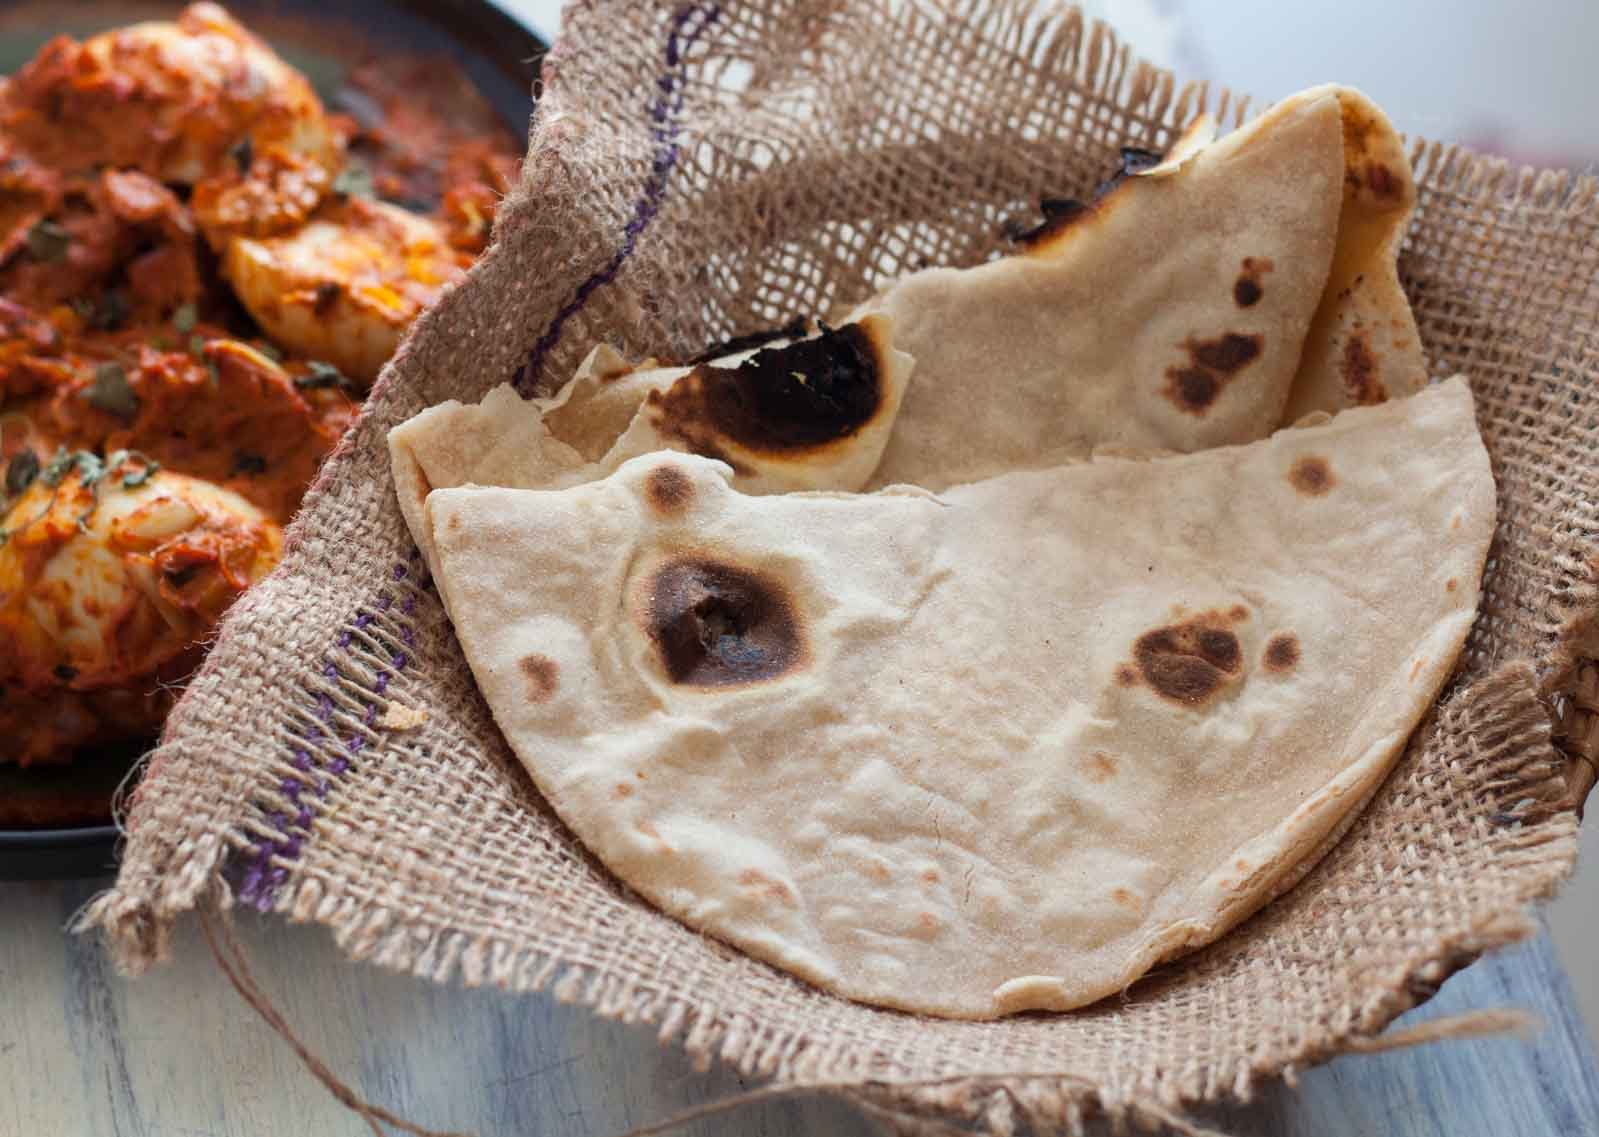 A man allegedly found spitting on tandoori rotis while baking them. The incident, reportedly, took place at a Dhaba in Haryana's Gurugram.